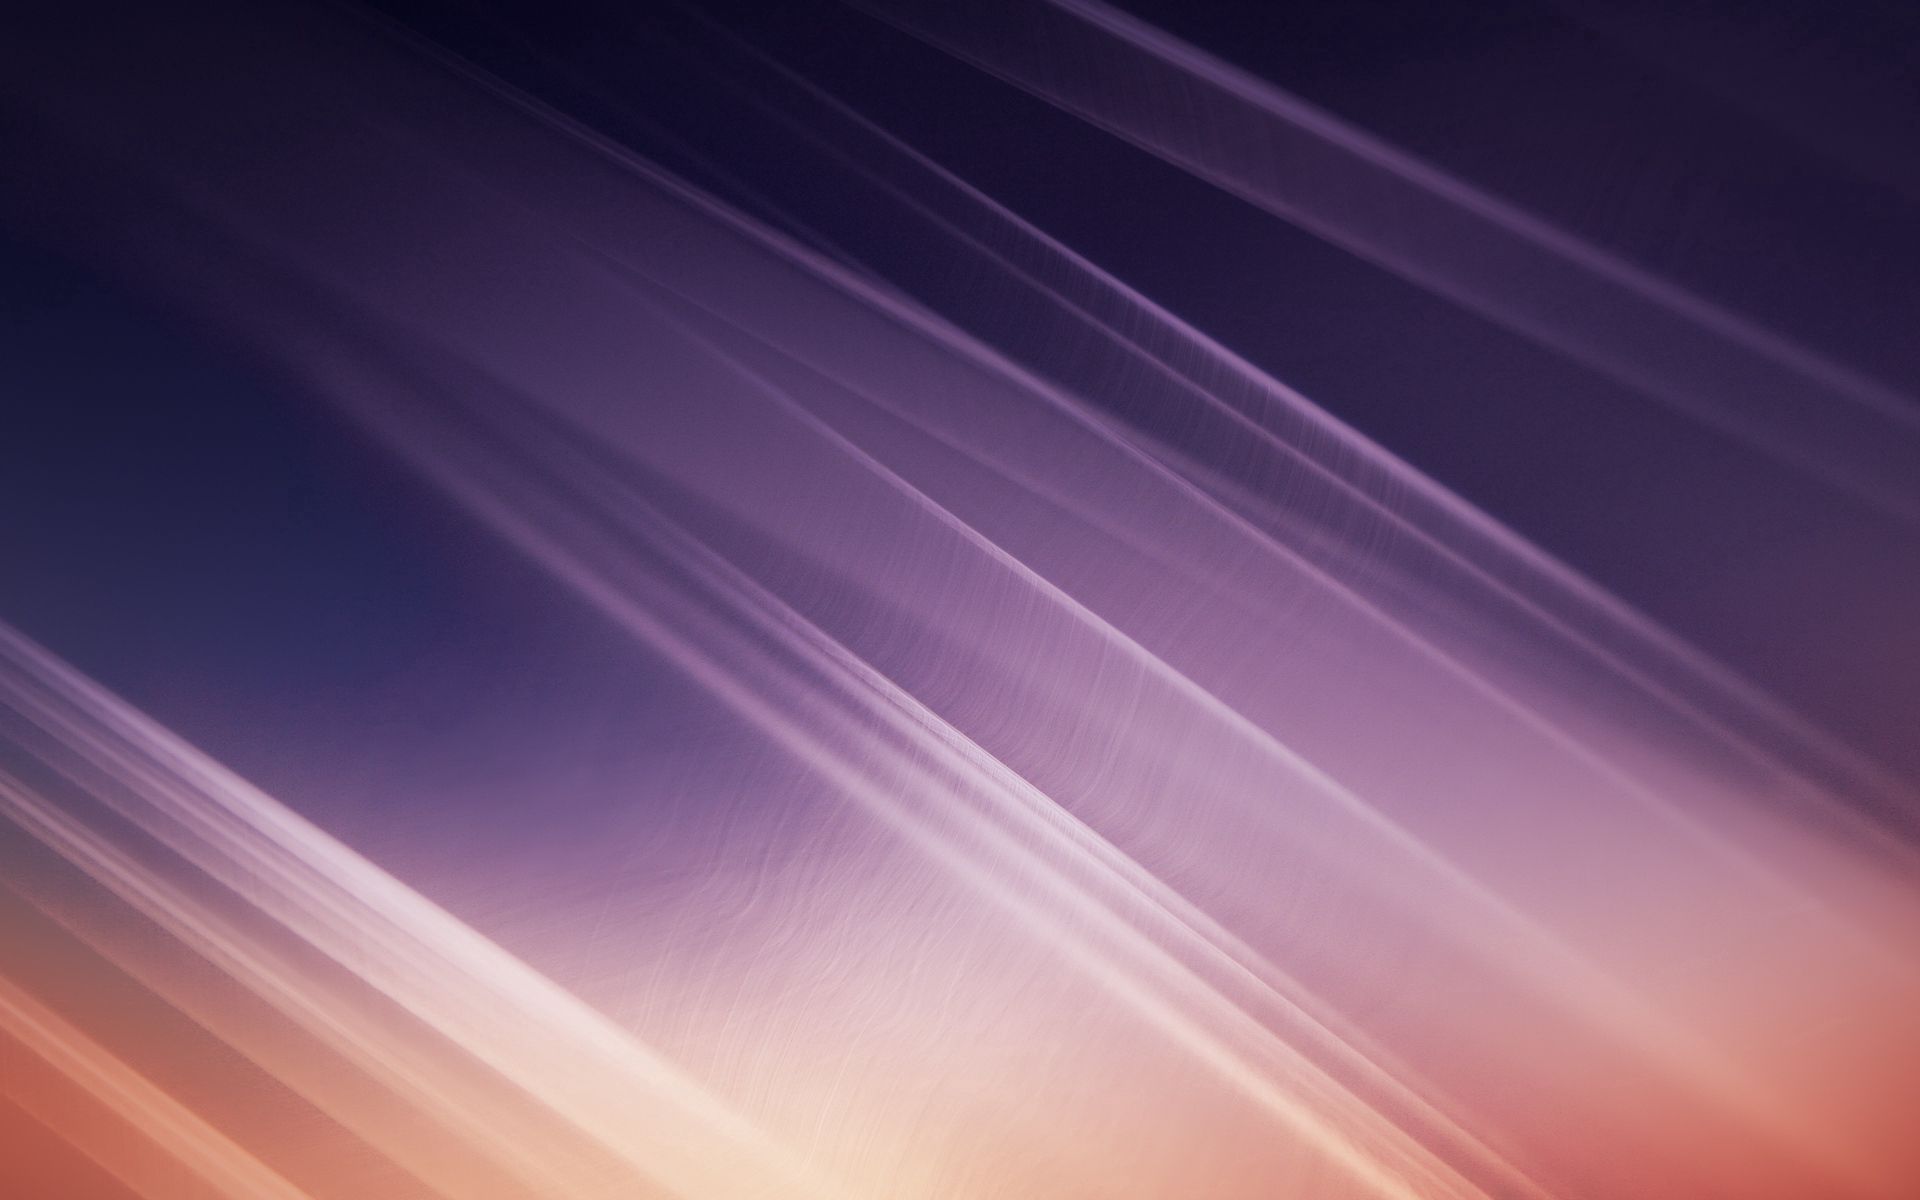 93306 download wallpaper abstract, lilac, shine, light, lines, shroud screensavers and pictures for free